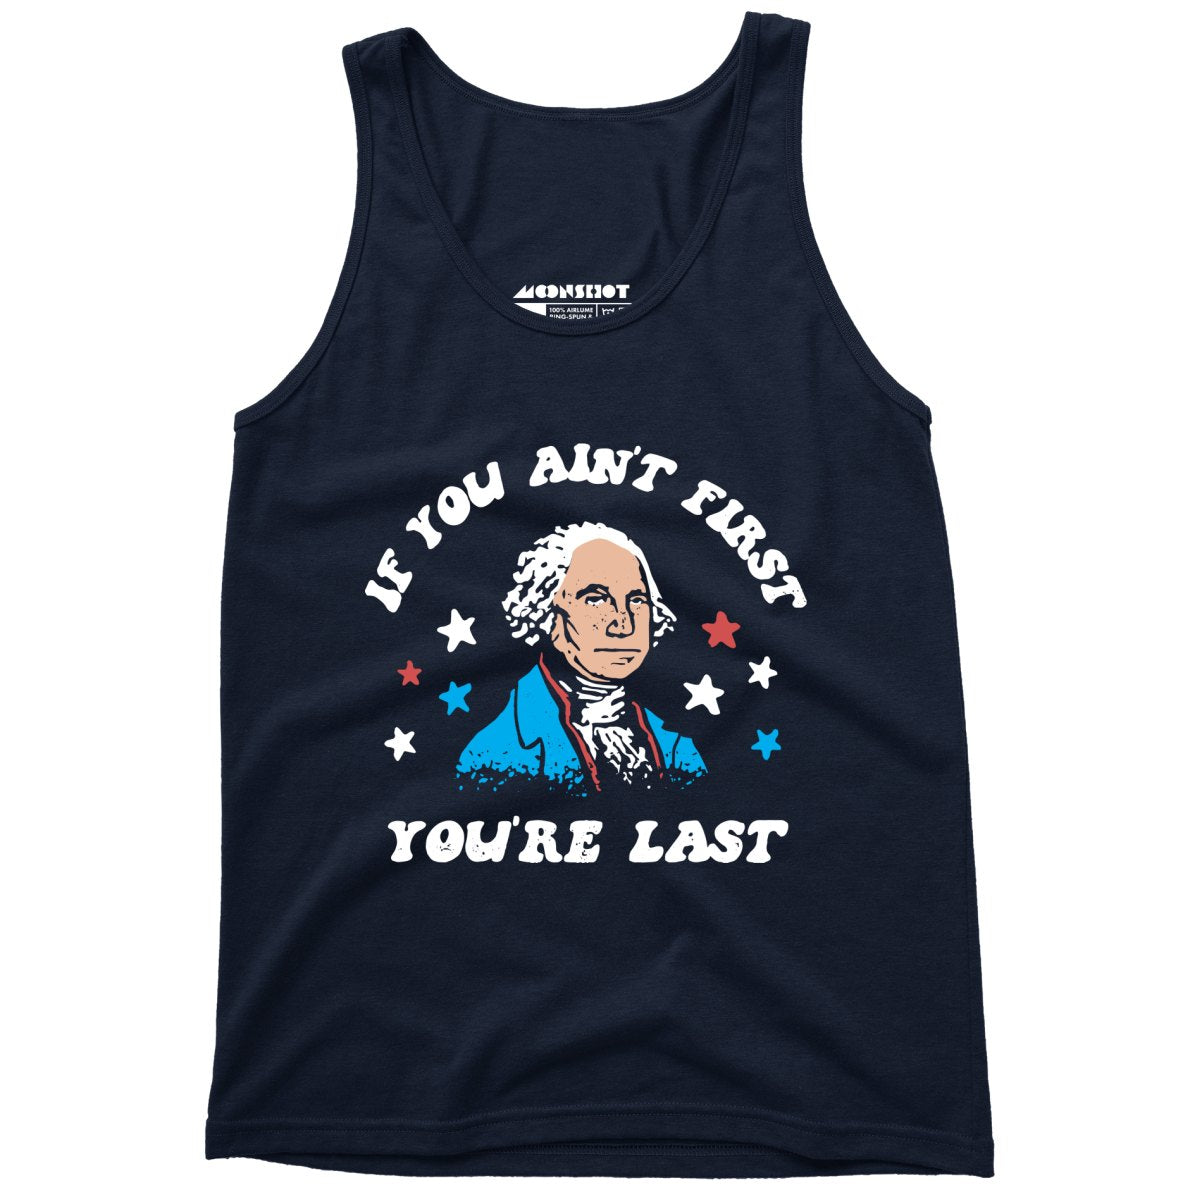 If You Ain't First You're Last - Unisex Tank Top